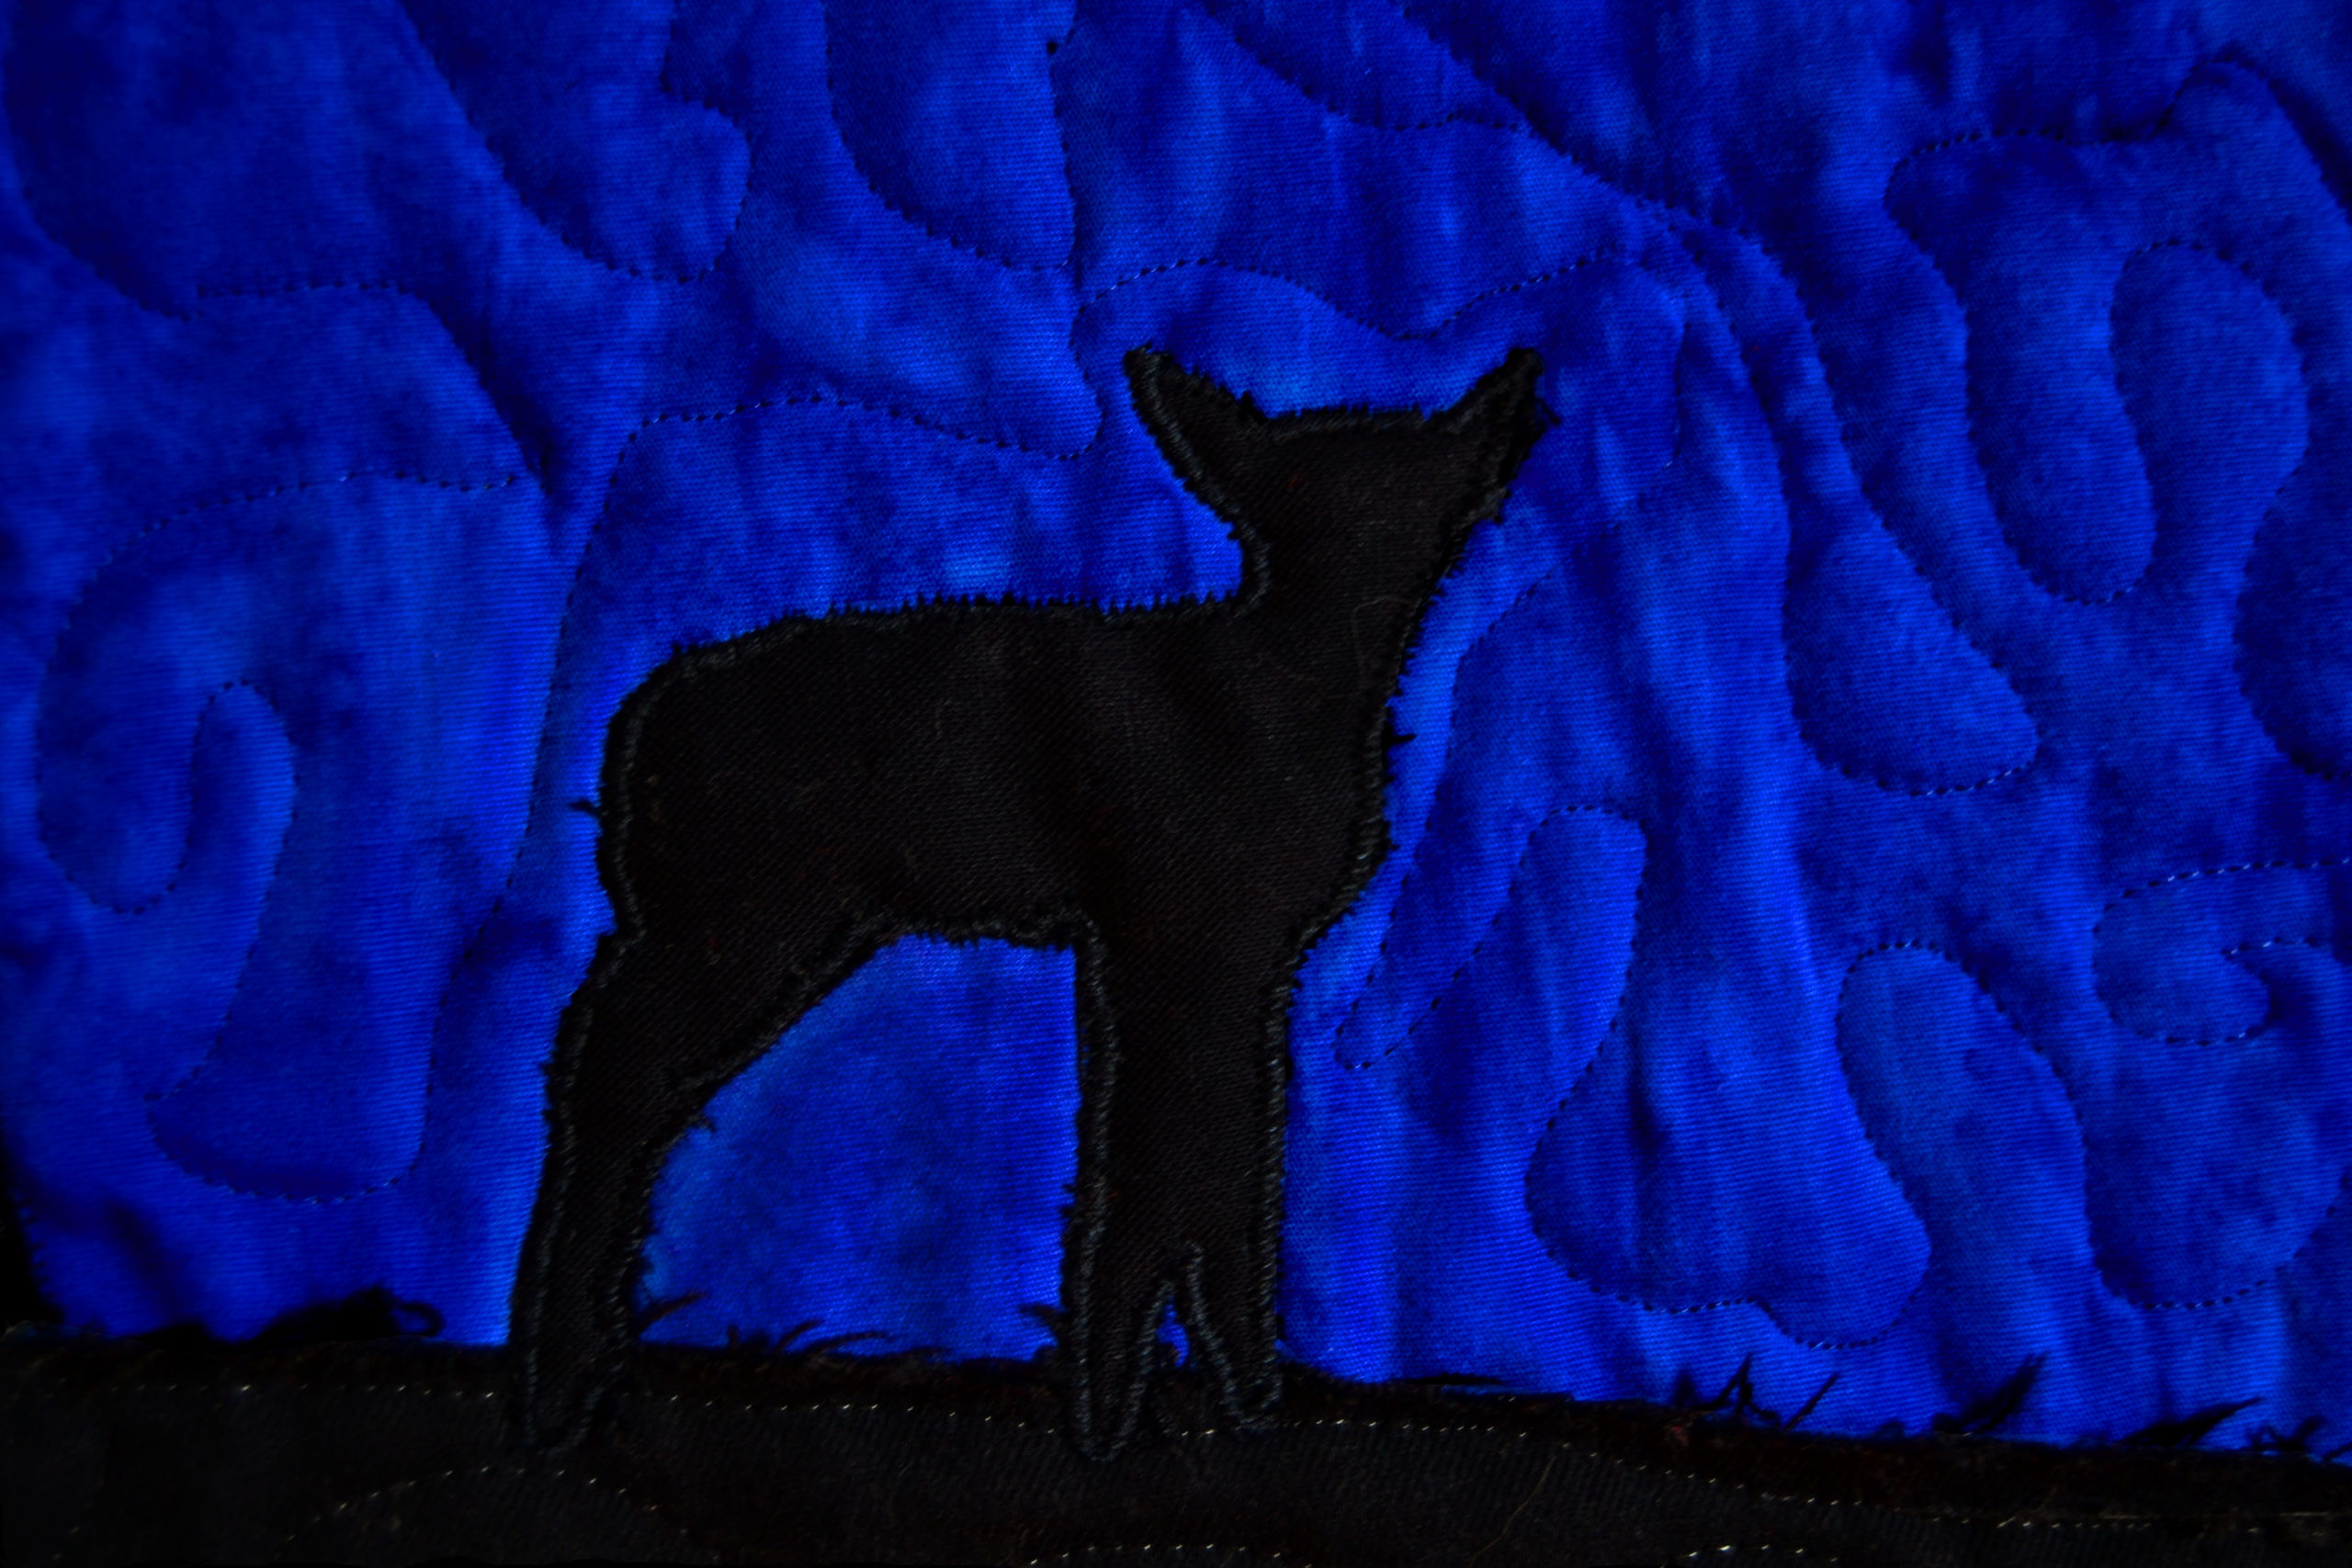 Lamb silhouette - quilted using free motion quilting techniques